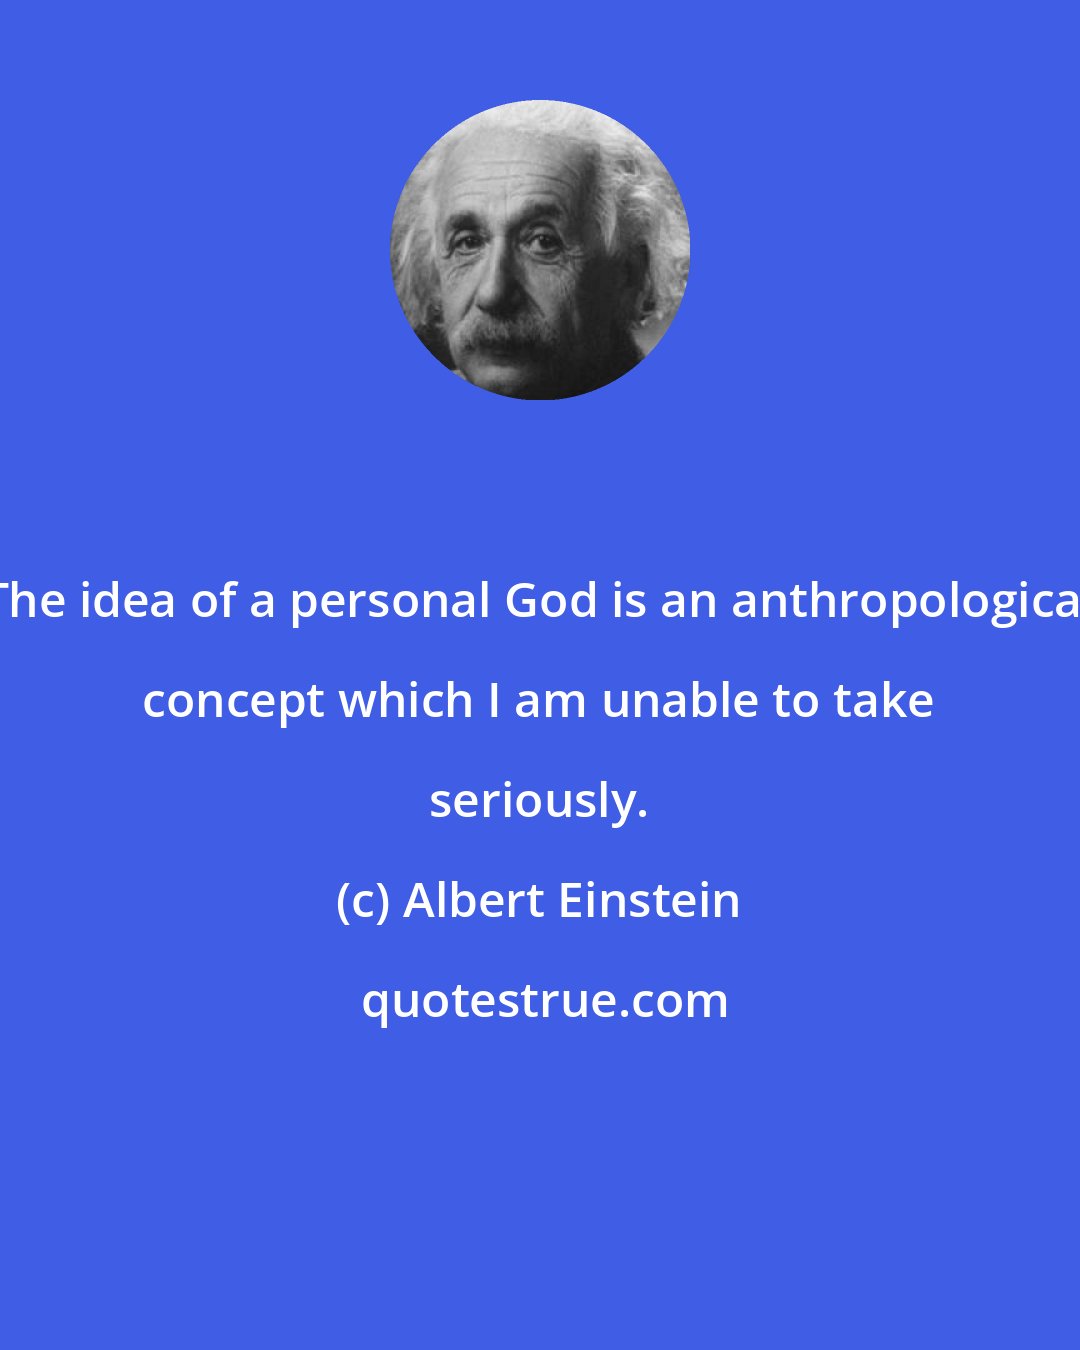 Albert Einstein: The idea of a personal God is an anthropological concept which I am unable to take seriously.